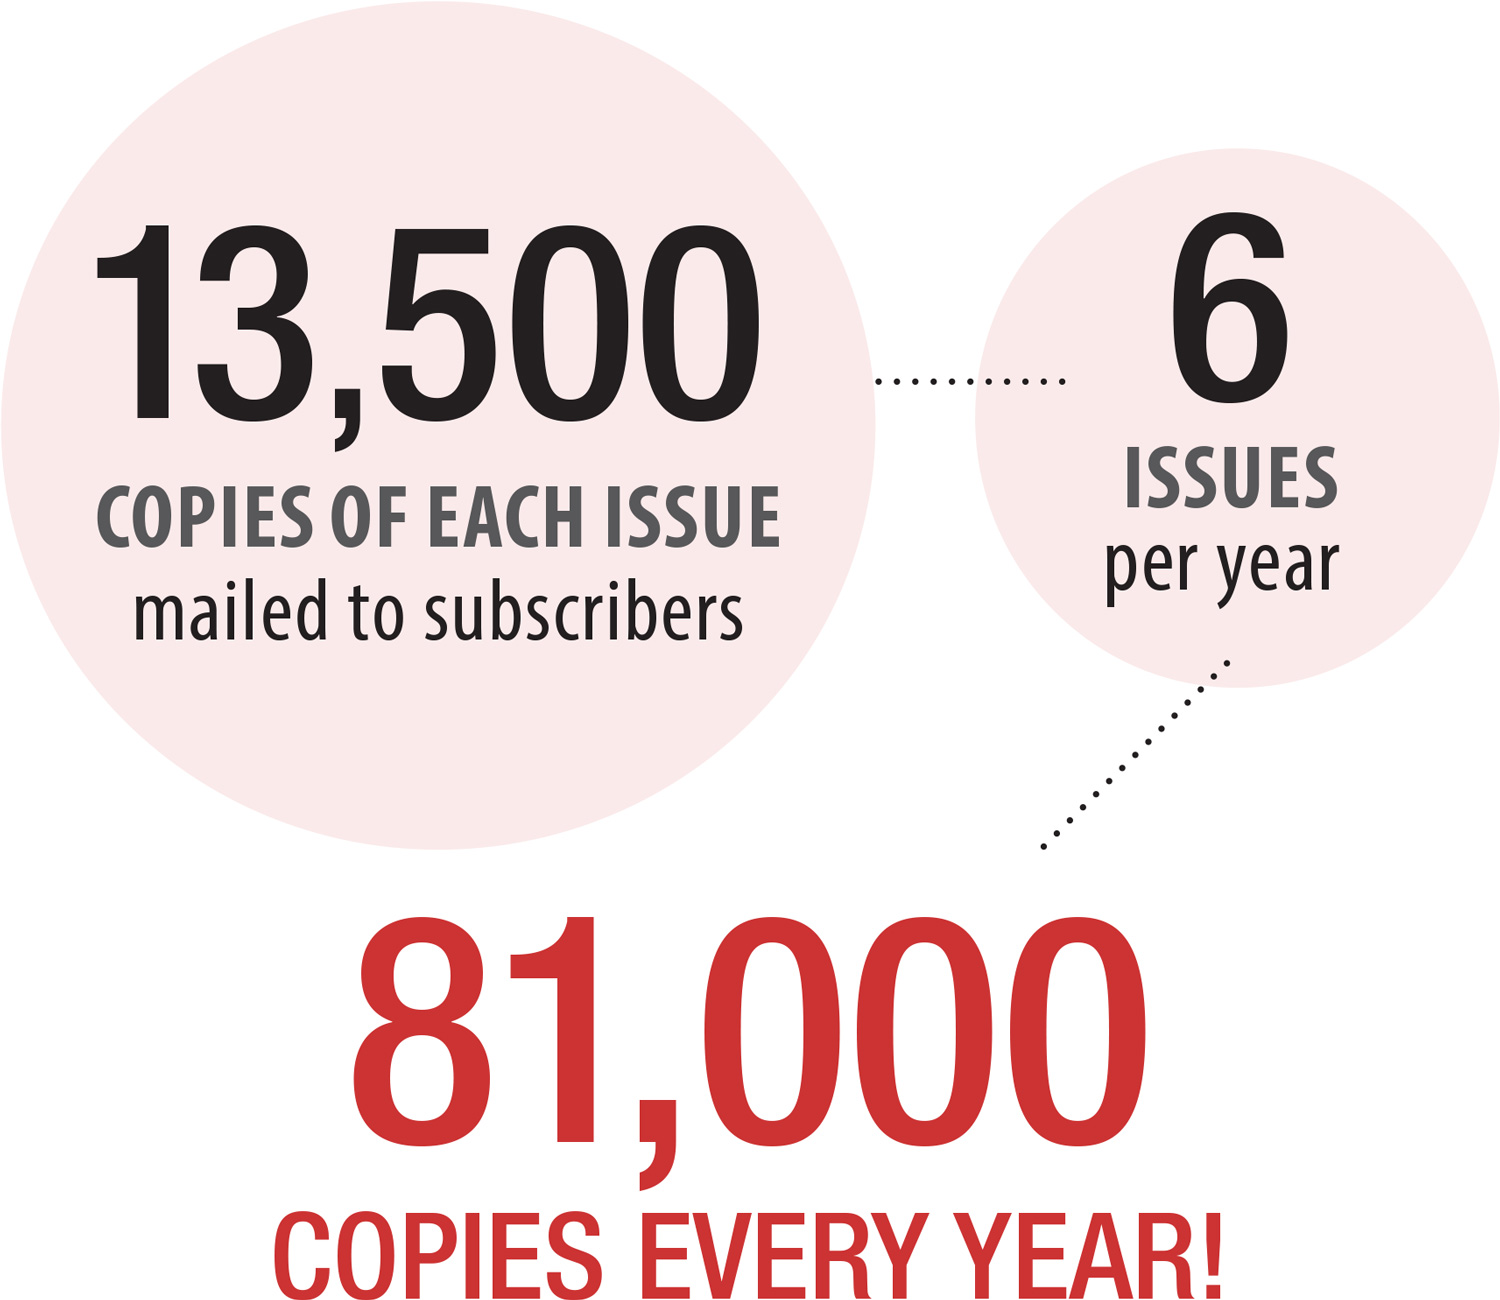 13,500 copies of each issue mailed to subscribers, 6 issues per year, 81,000 copies every year